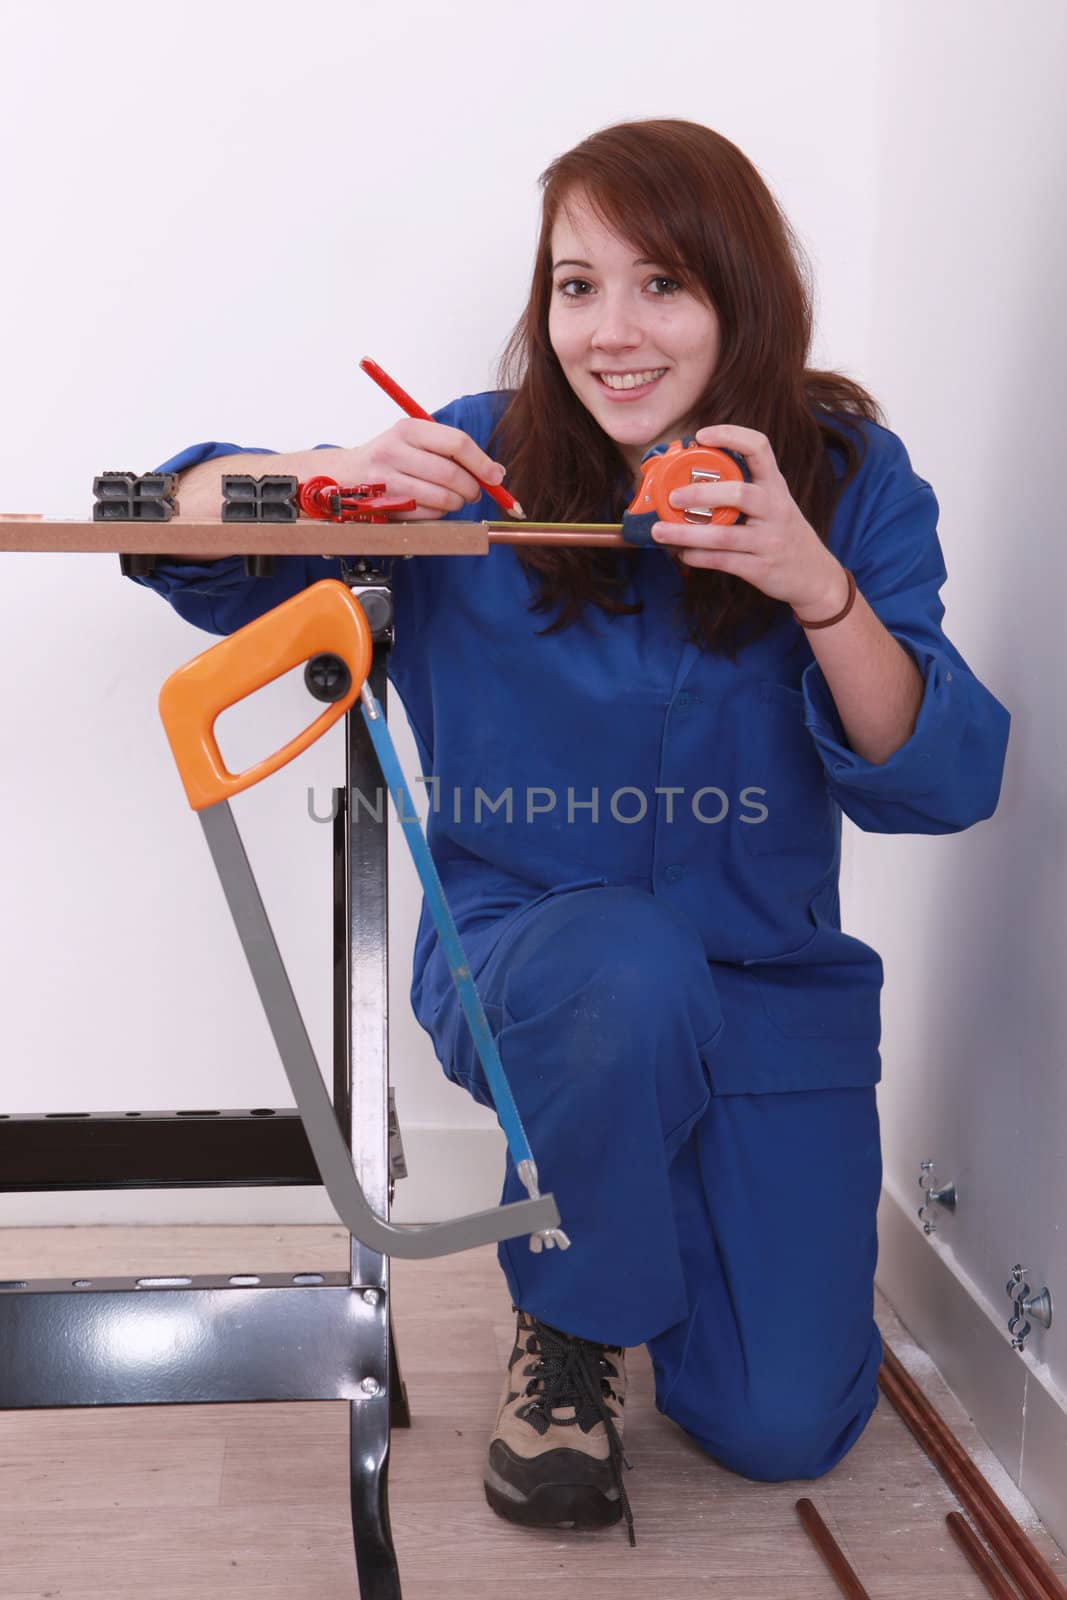 craftswoman taking measurements by phovoir